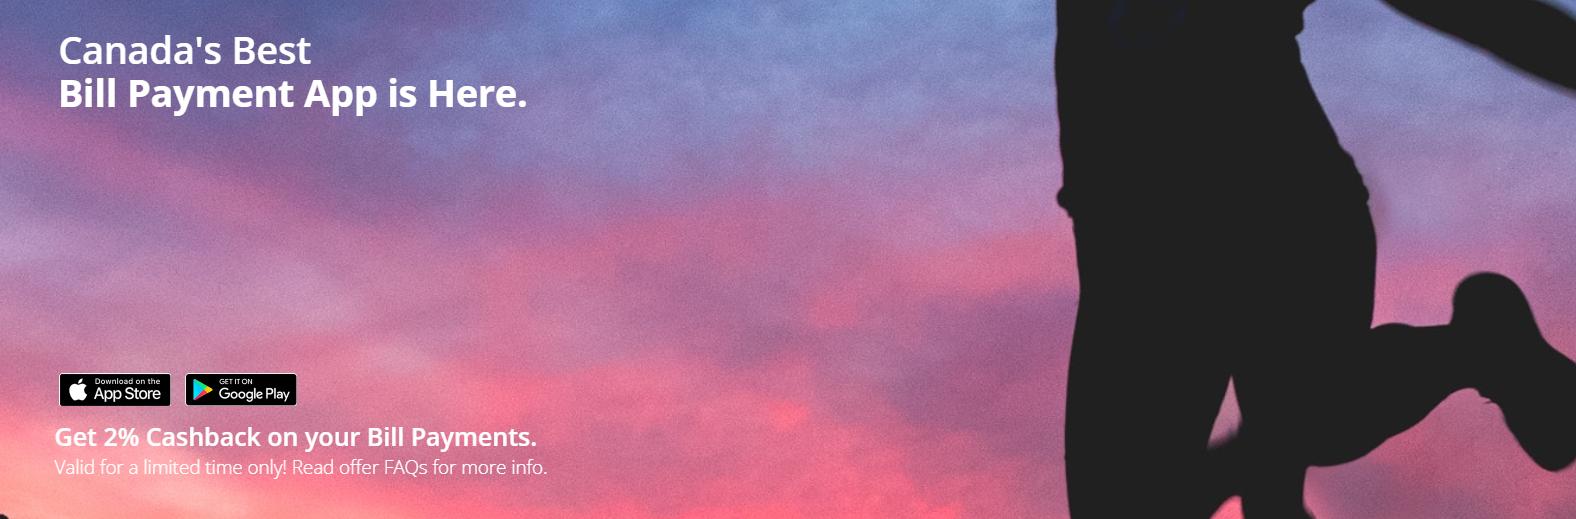 a pink and blue sky